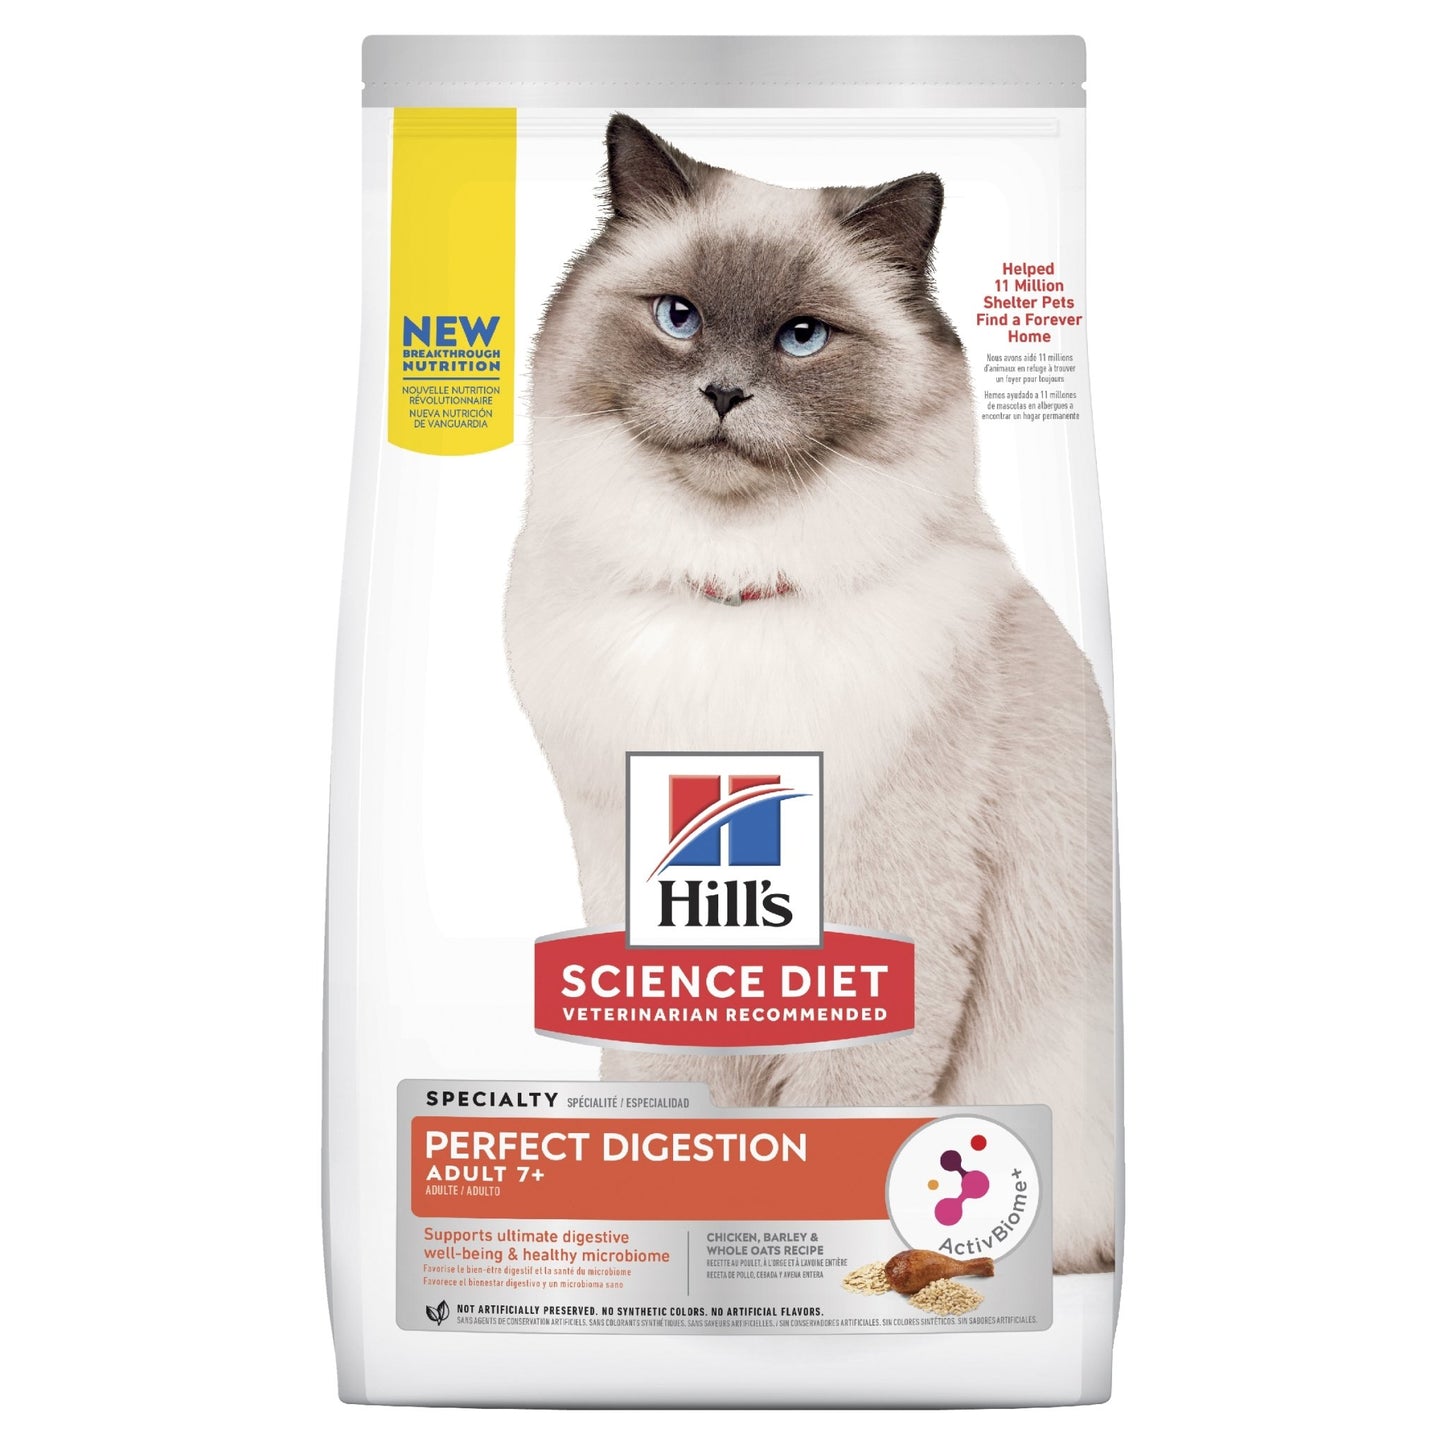 Hill' Science Diet Perfect Digestion Adult 7+ Dry Cat Food 2.72kg - Woonona Petfood & Produce